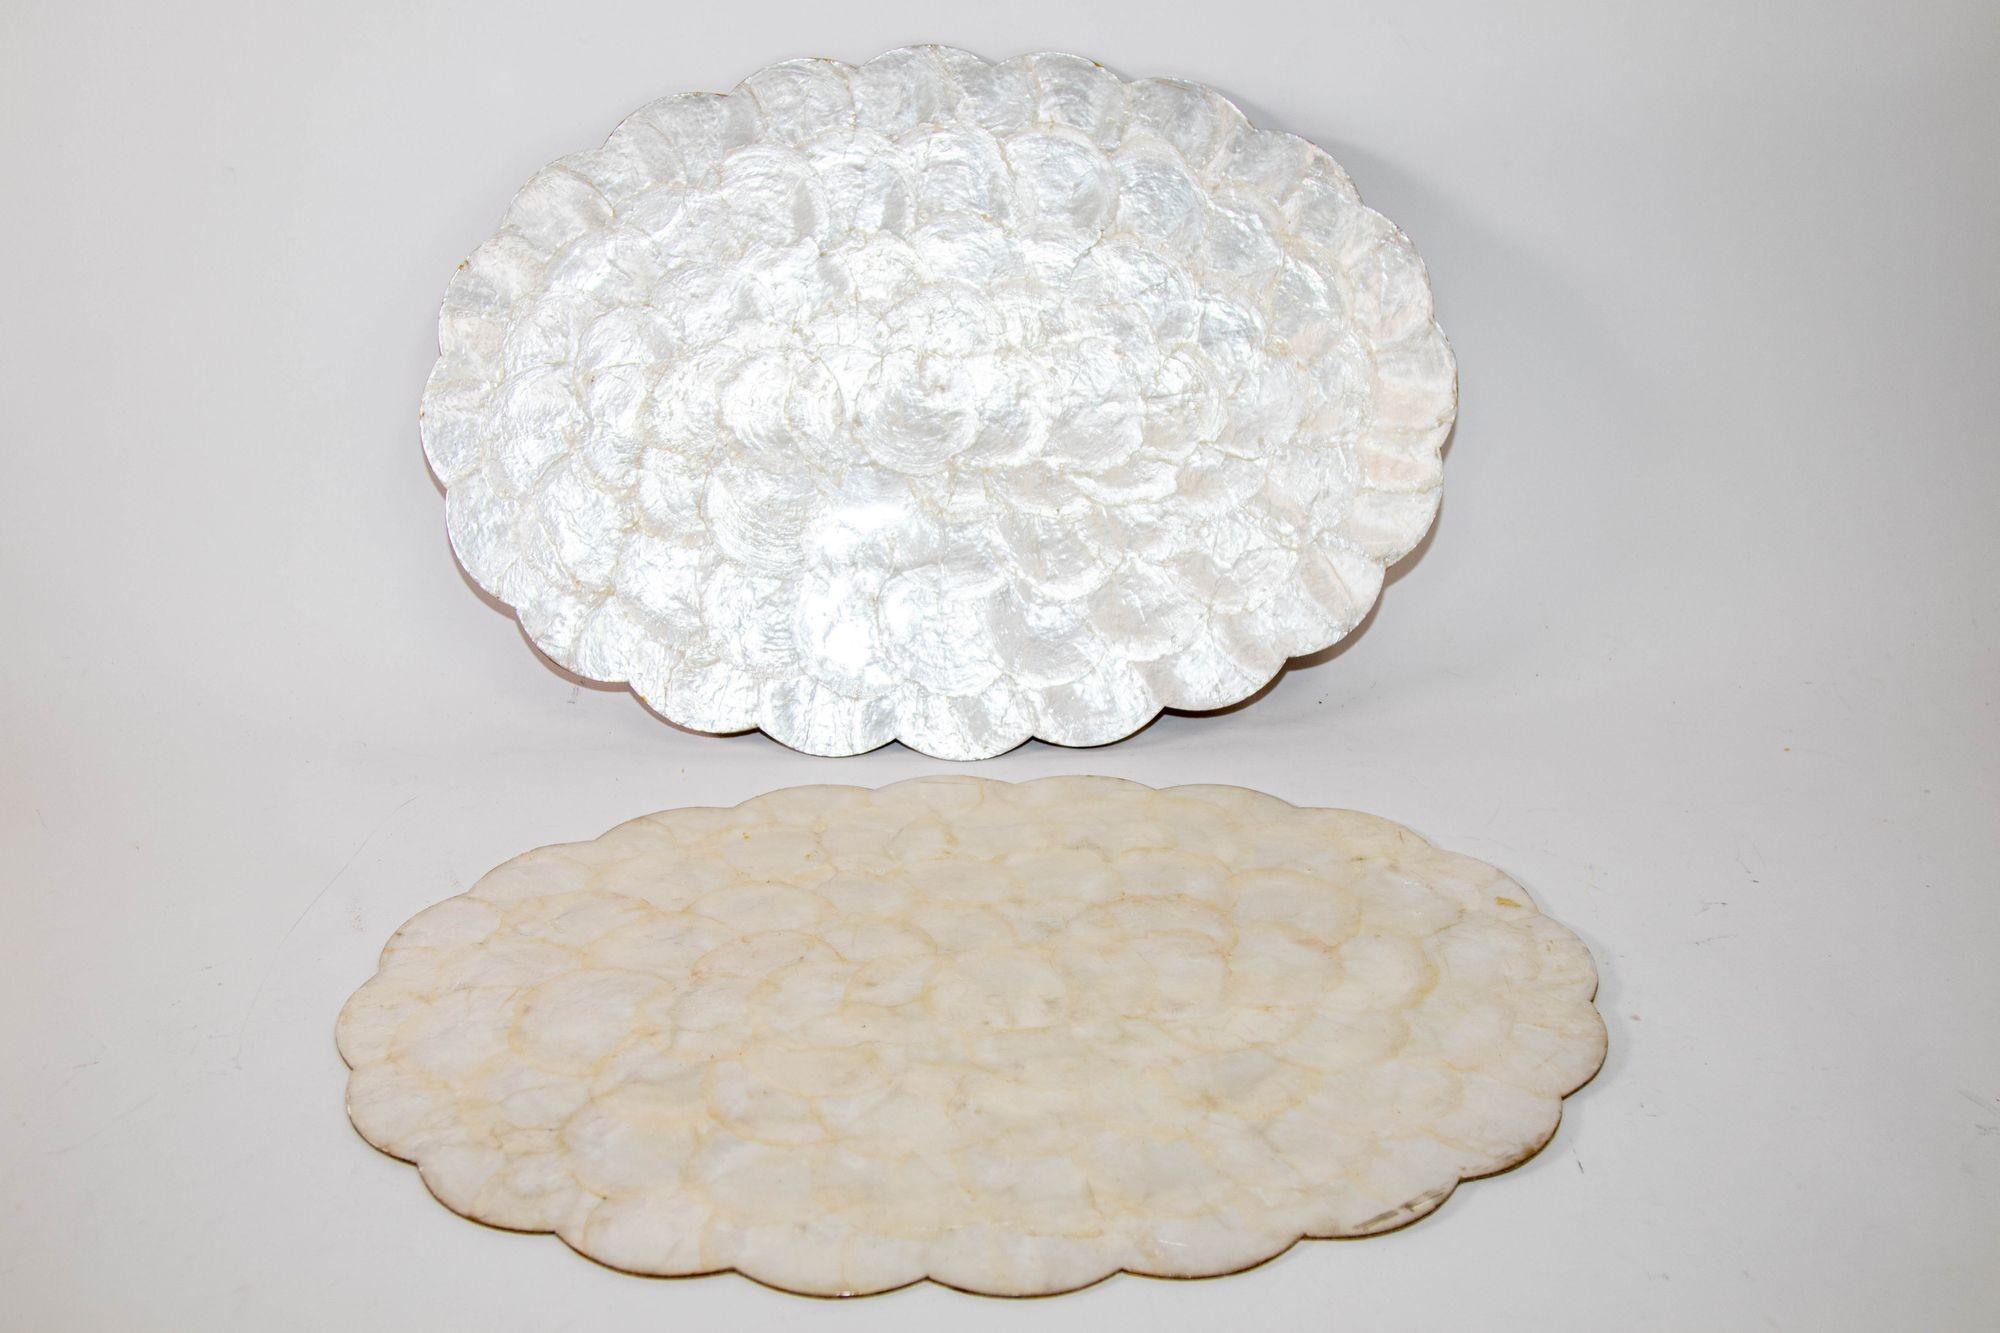 Vintage Hallie St Mary placemats, set of two capiz, abalone, pearl shell design scalloped edge oval placemats.
Placemat in luminous, beautiful mother of pearl shell color.
The reverse of these placemats is cork.
These would make a beautiful,